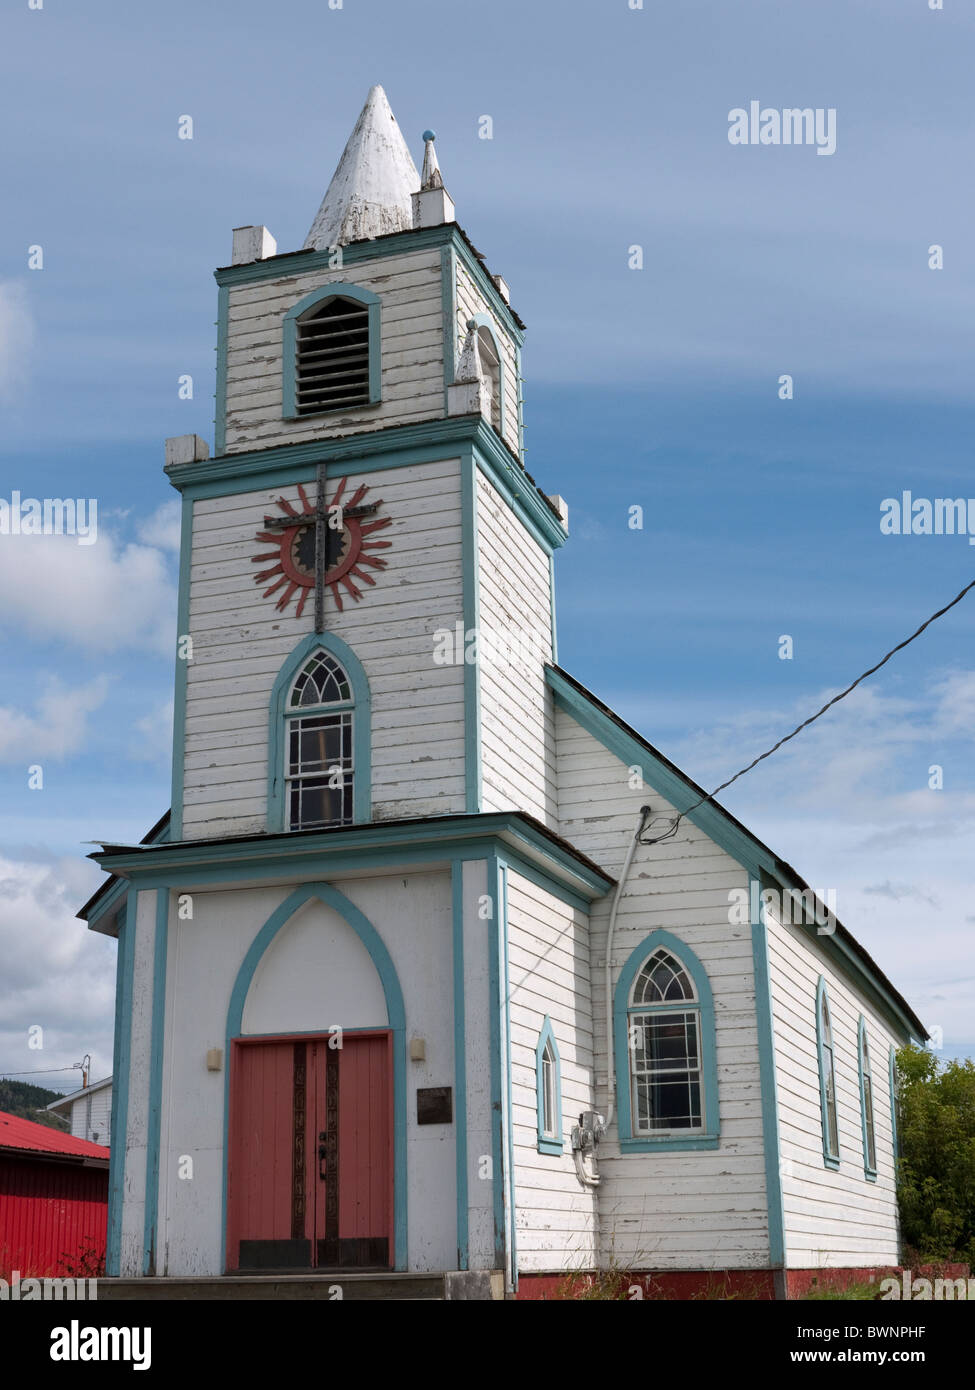 Wooden church at First Nation Village The Hazletons, British Columbia, Canada, Sept 2010 Stock Photo